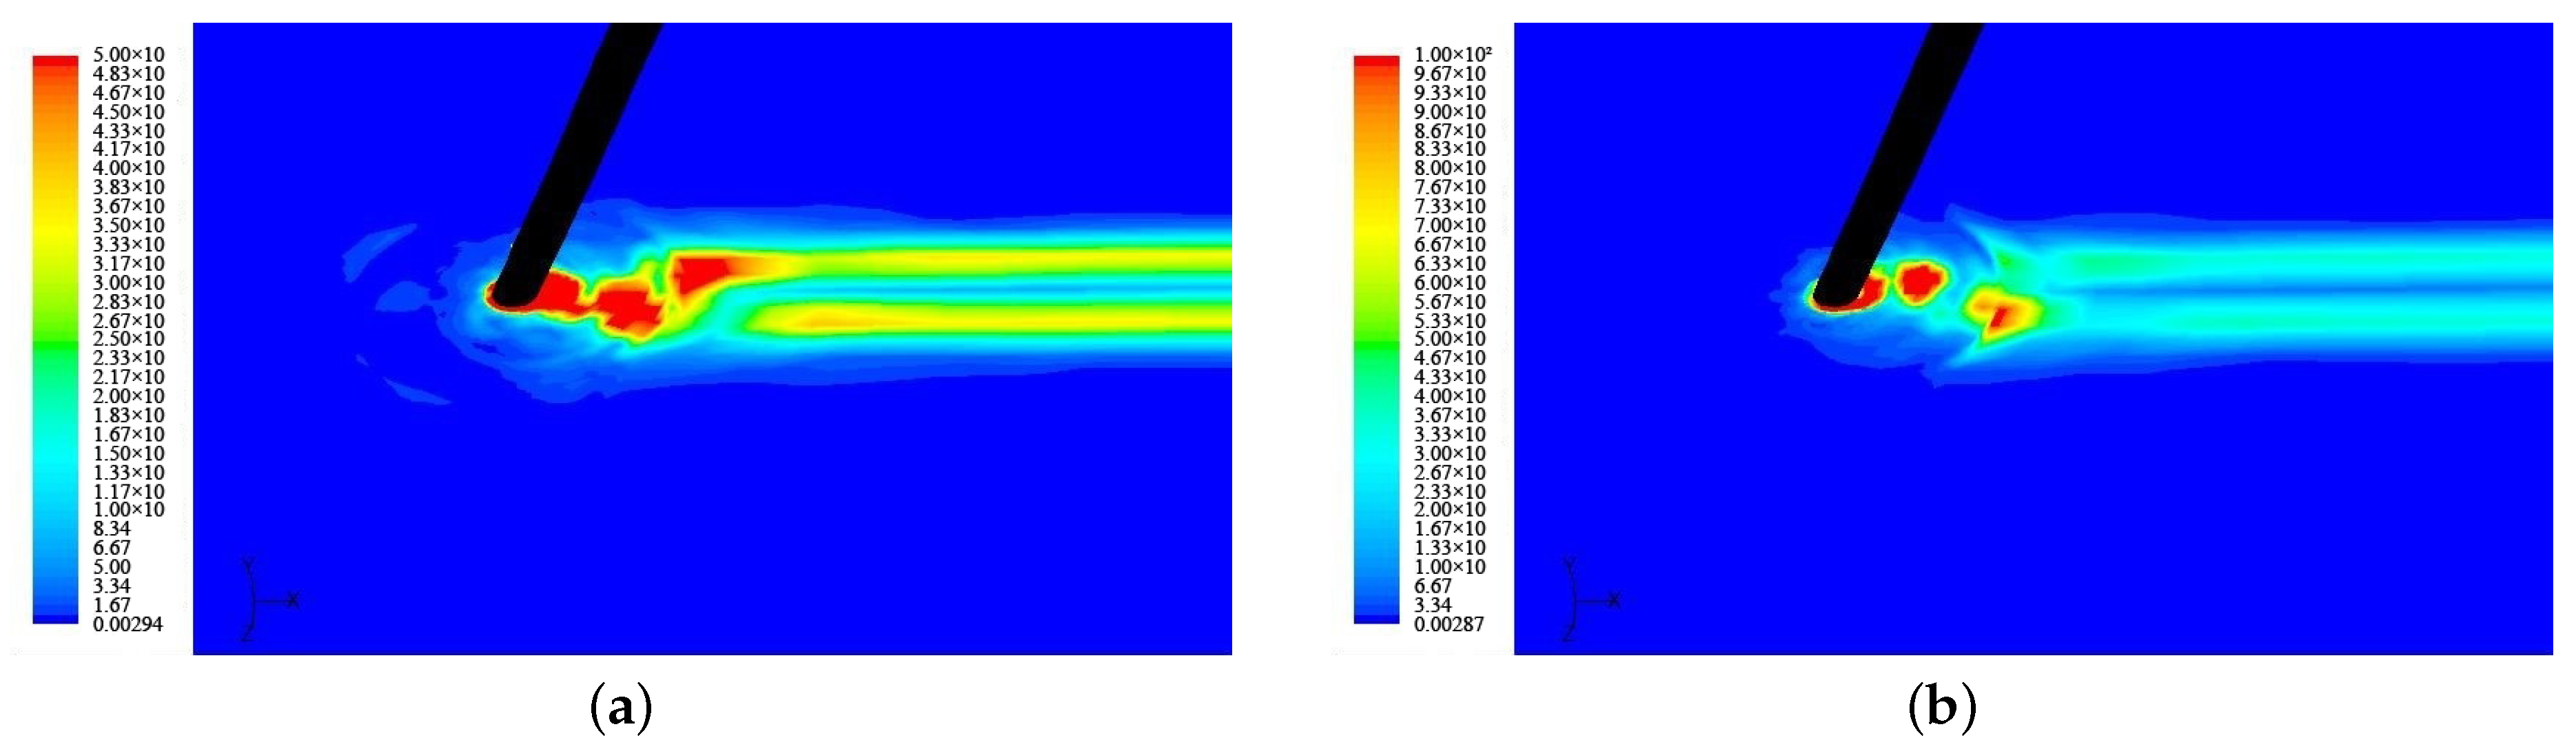 JMSE | Free Full-Text | Numerical Simulation of Vortex-Induced Vibration of  TTR and SCR